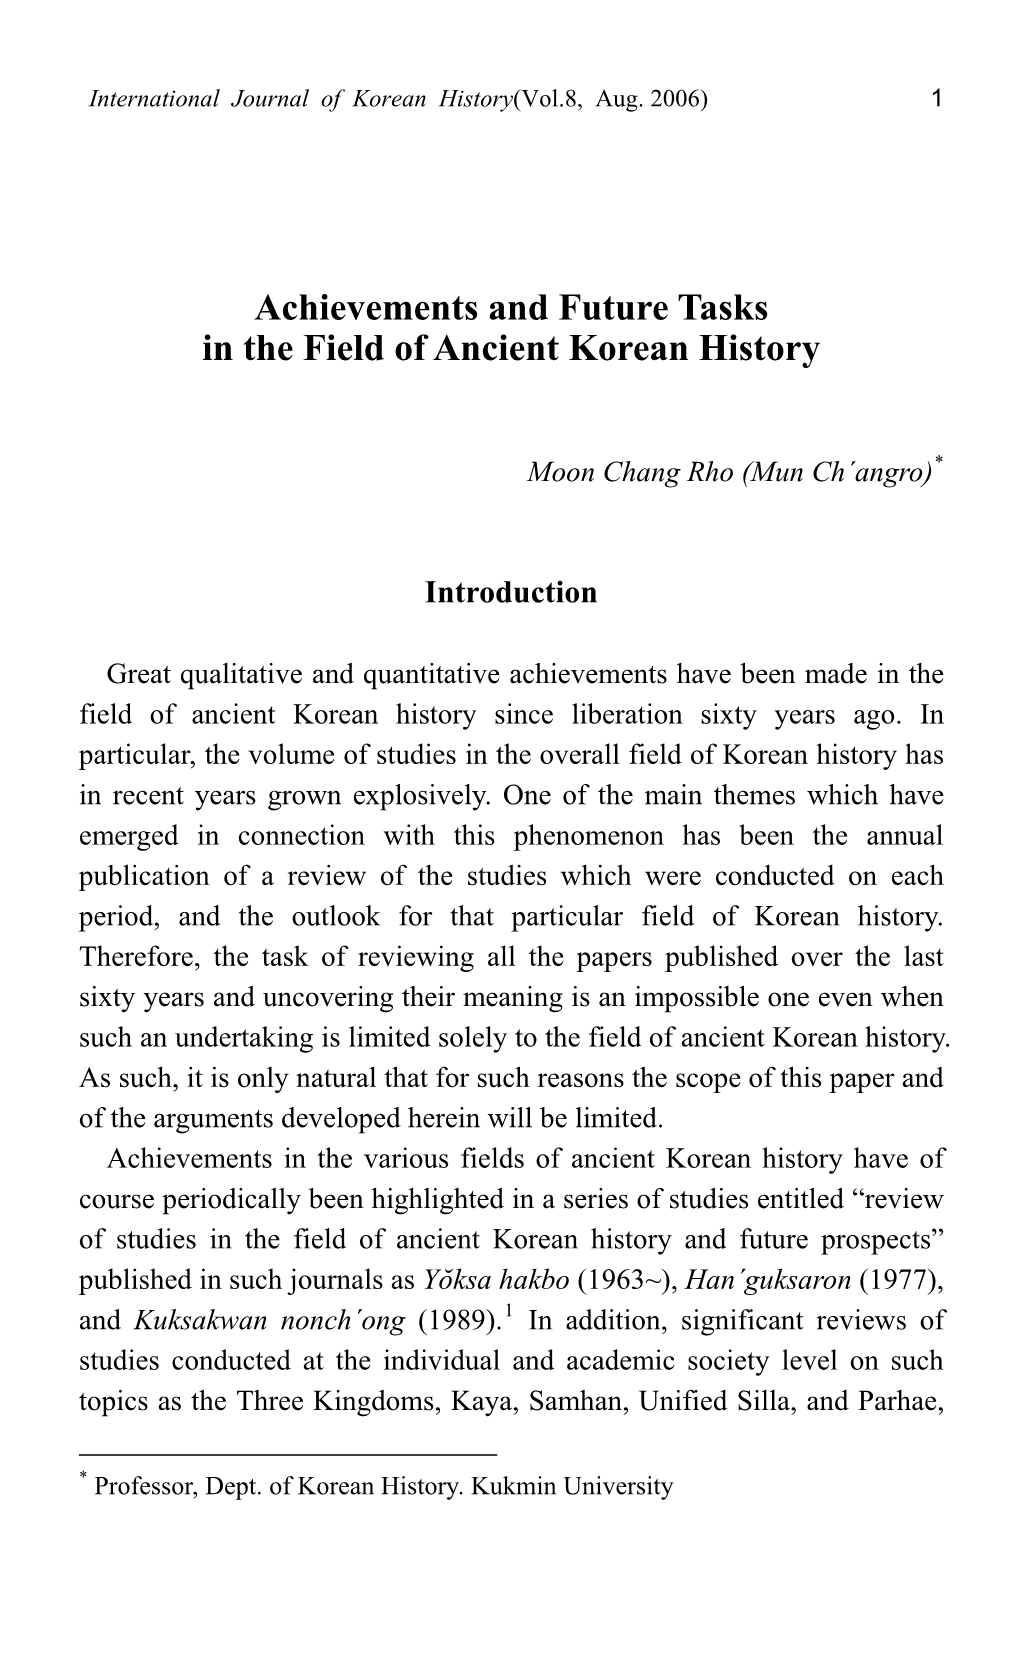 Achievements and Future Tasks in the Field of Ancient Korean History